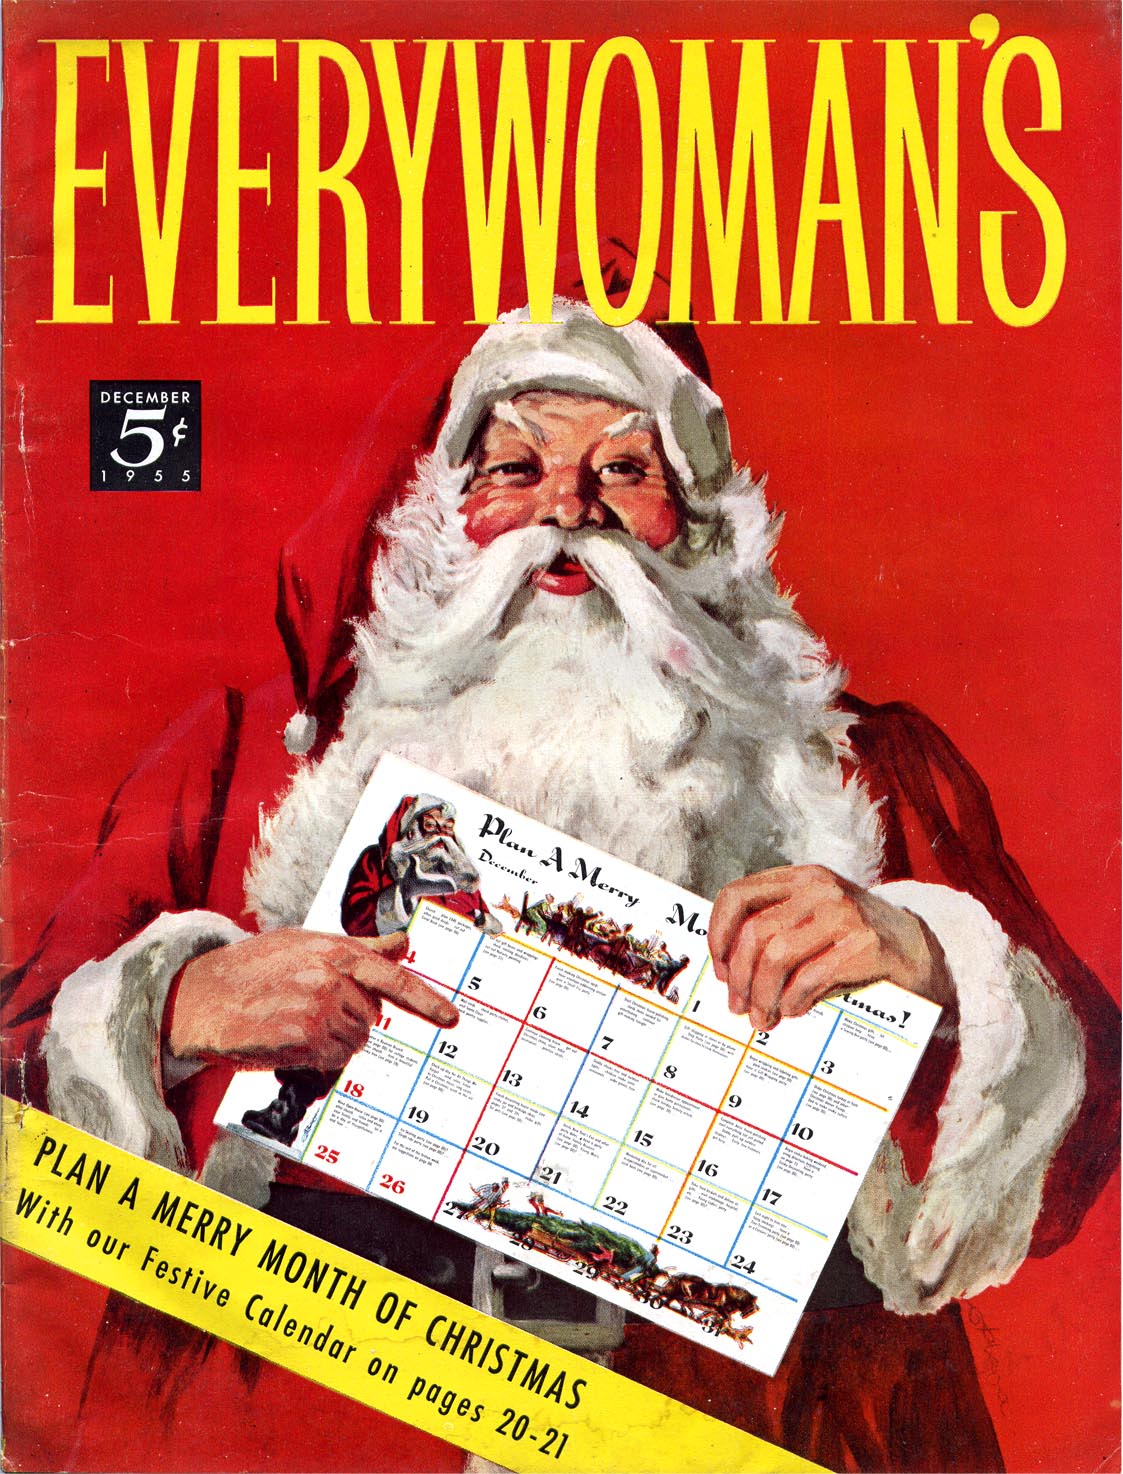 December 1955 - Plan a Merry Month of Christmas